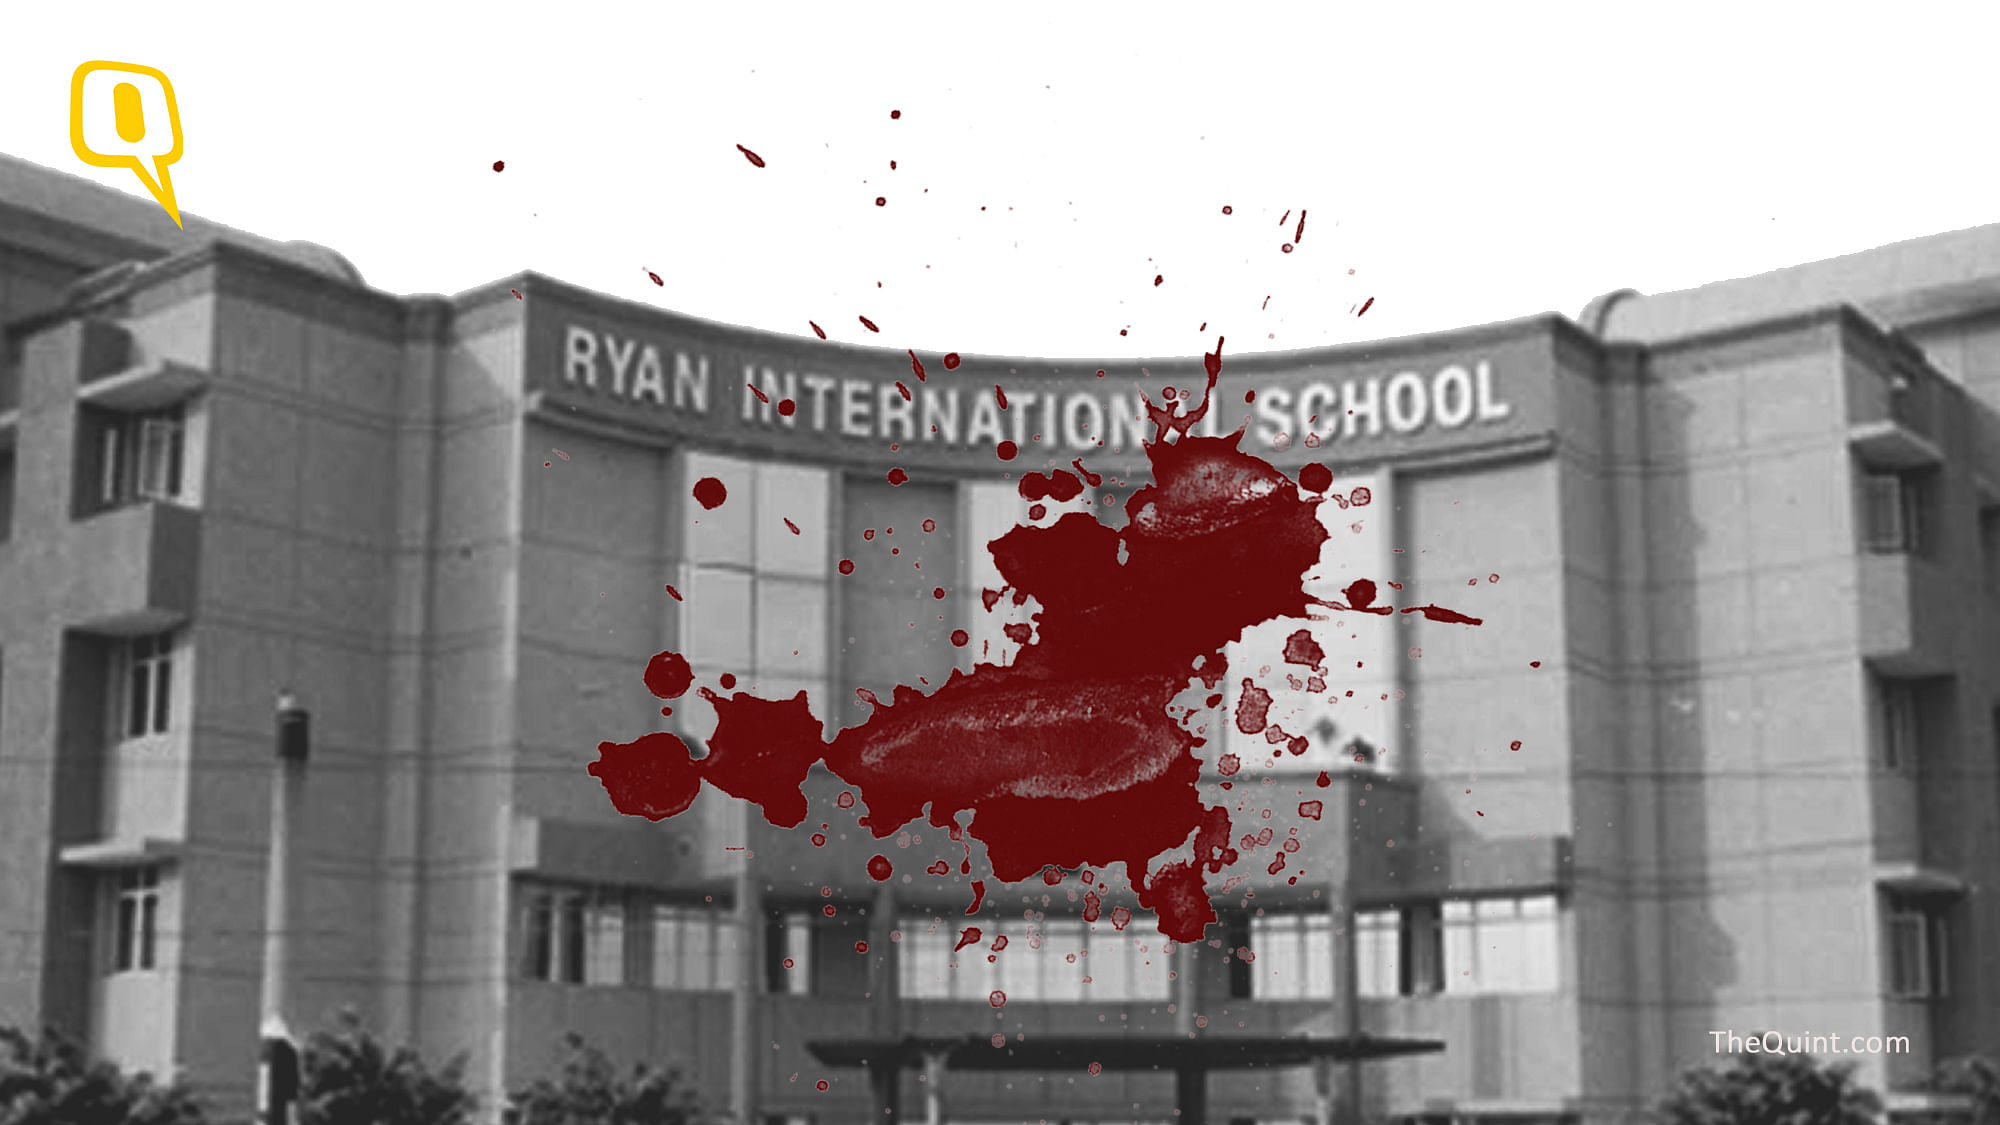 Ryan International School has been in the news after the recent murder of class 2 student in its Gurgaon branch.&nbsp;